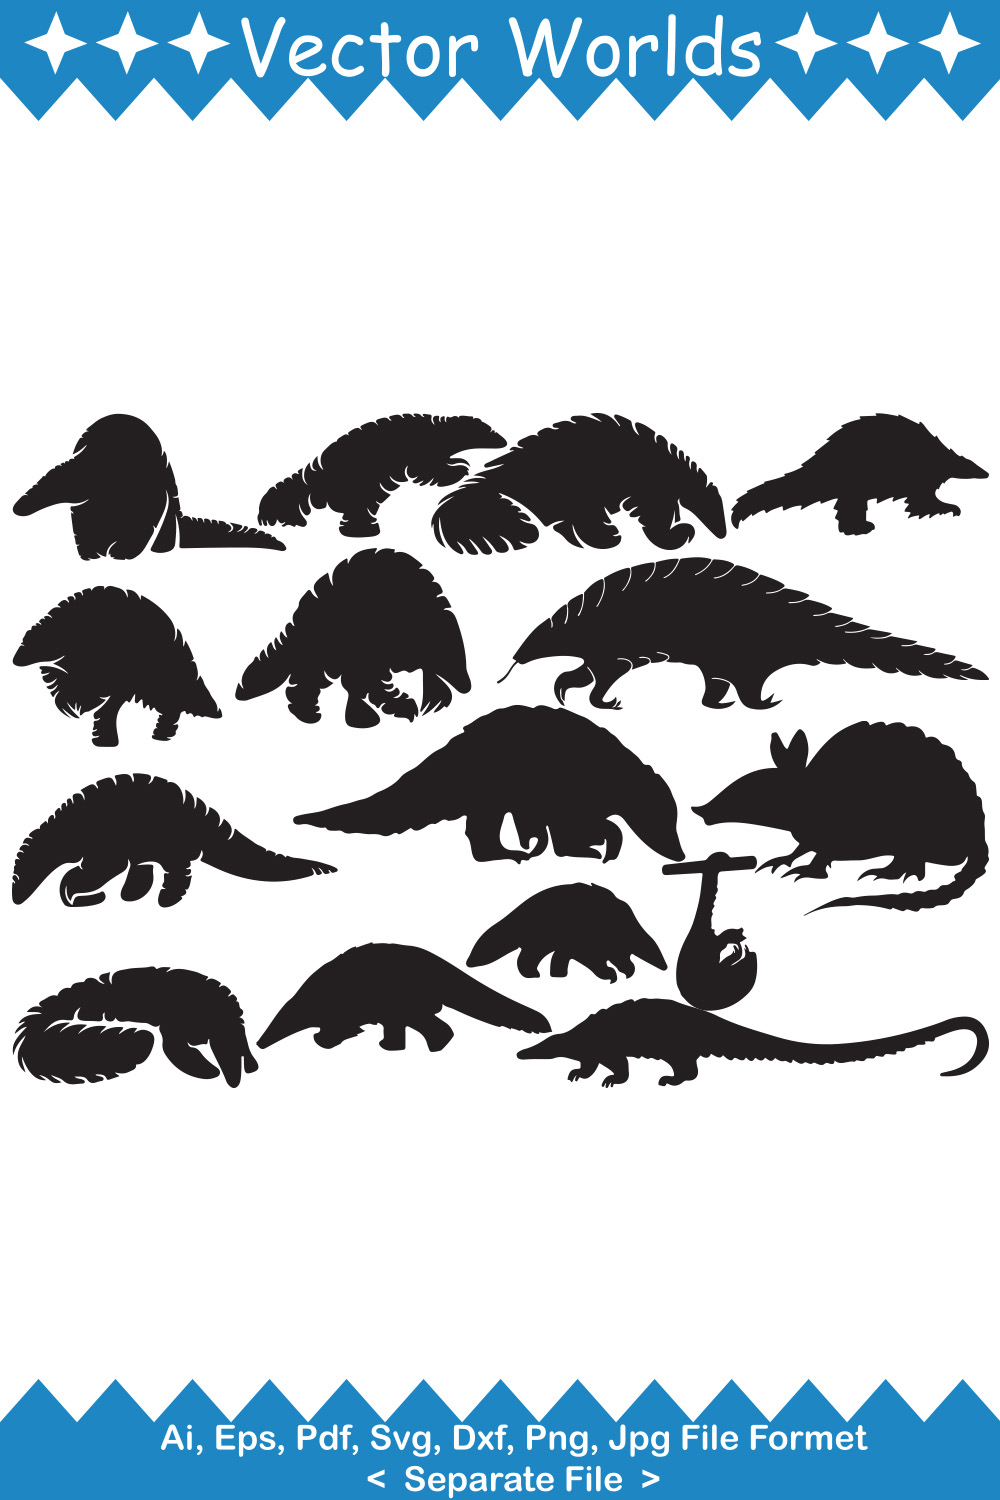 Set of silhouettes of different types of animals.